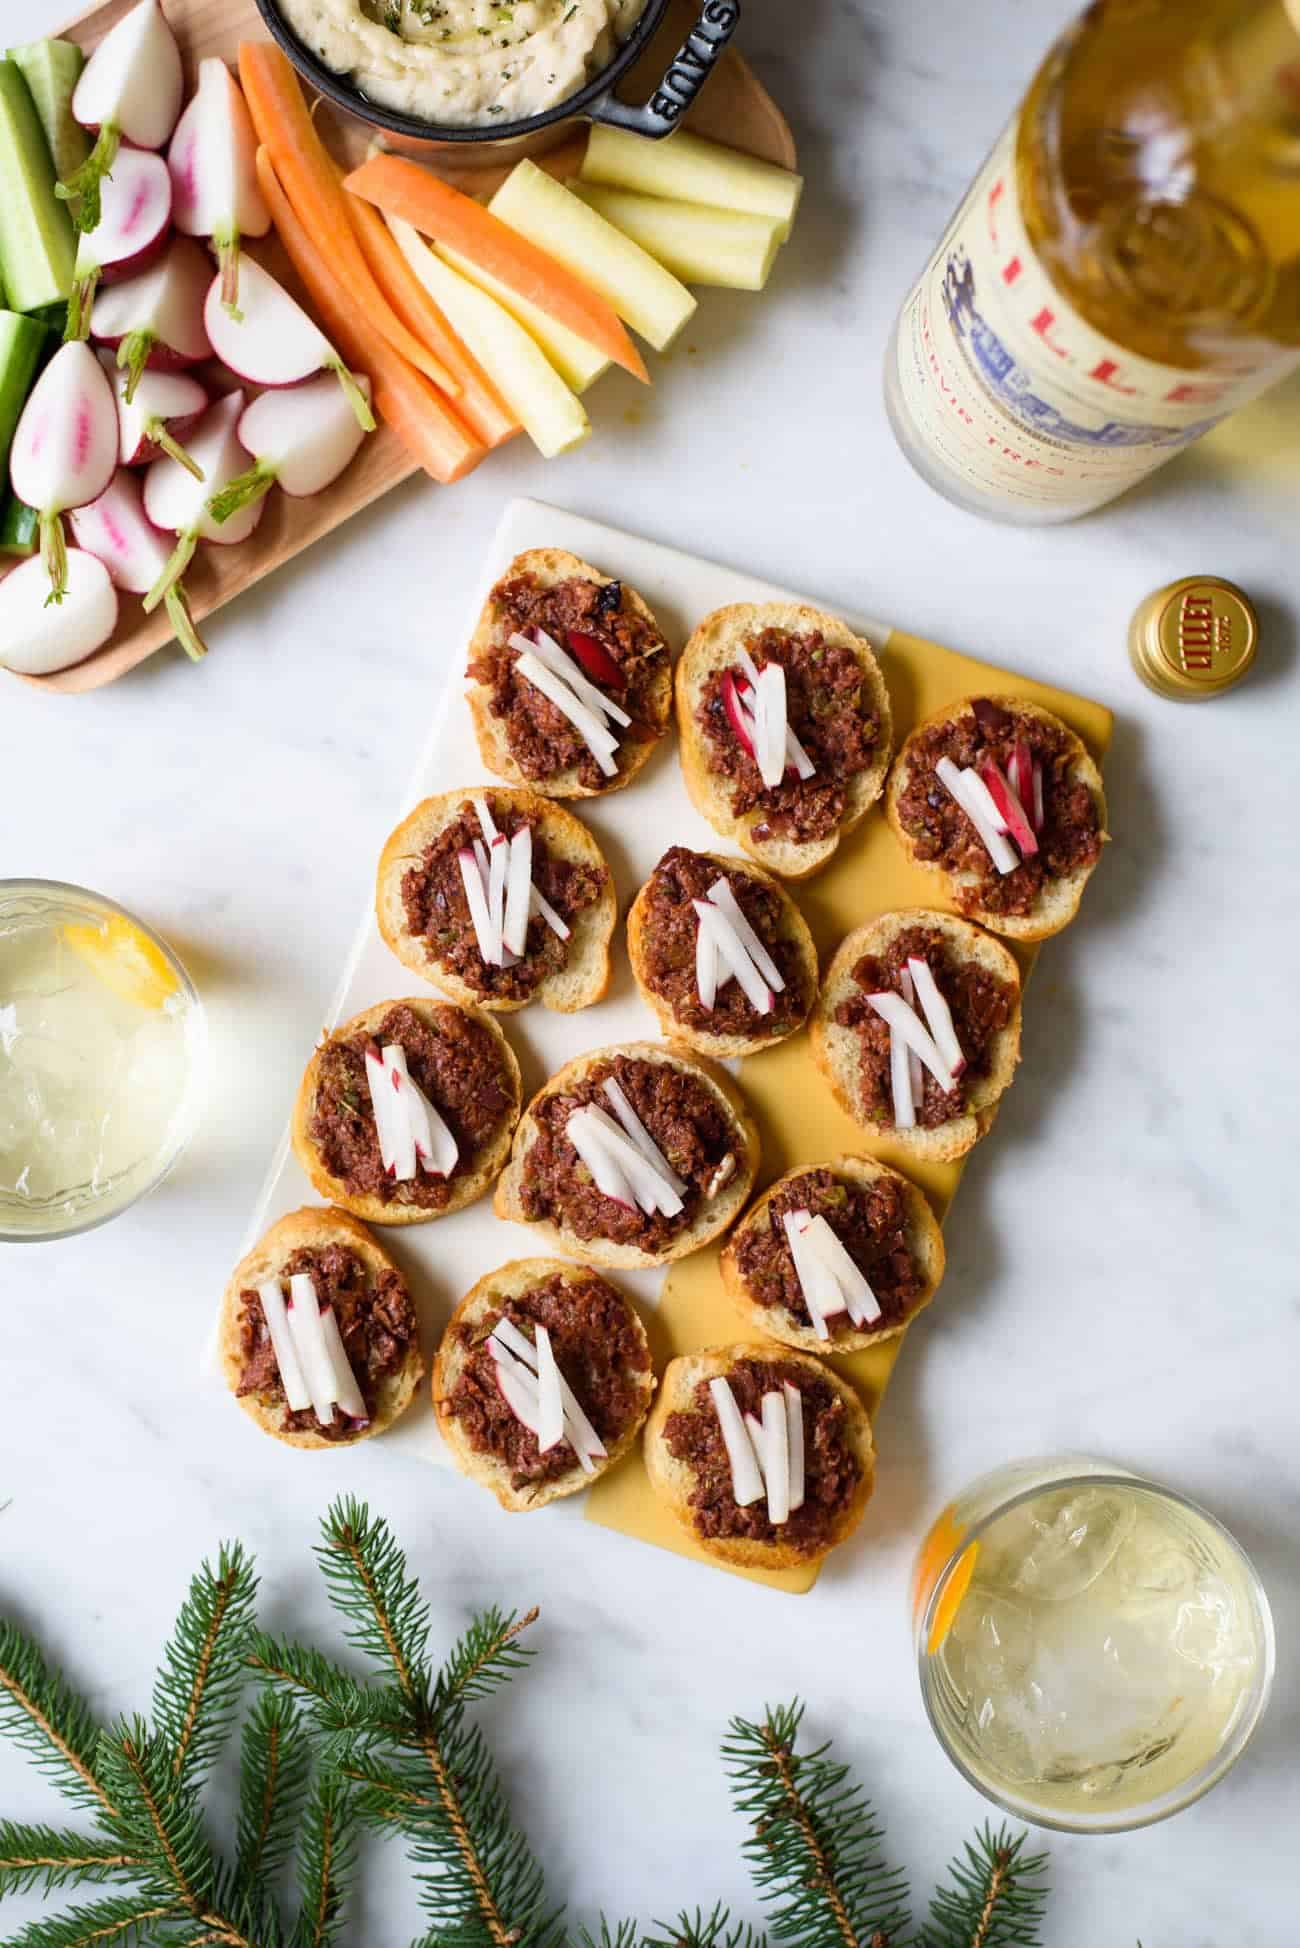 Sun-dried tomato tapenade on crostini with radish matchsticks, served with Lillet Blanc